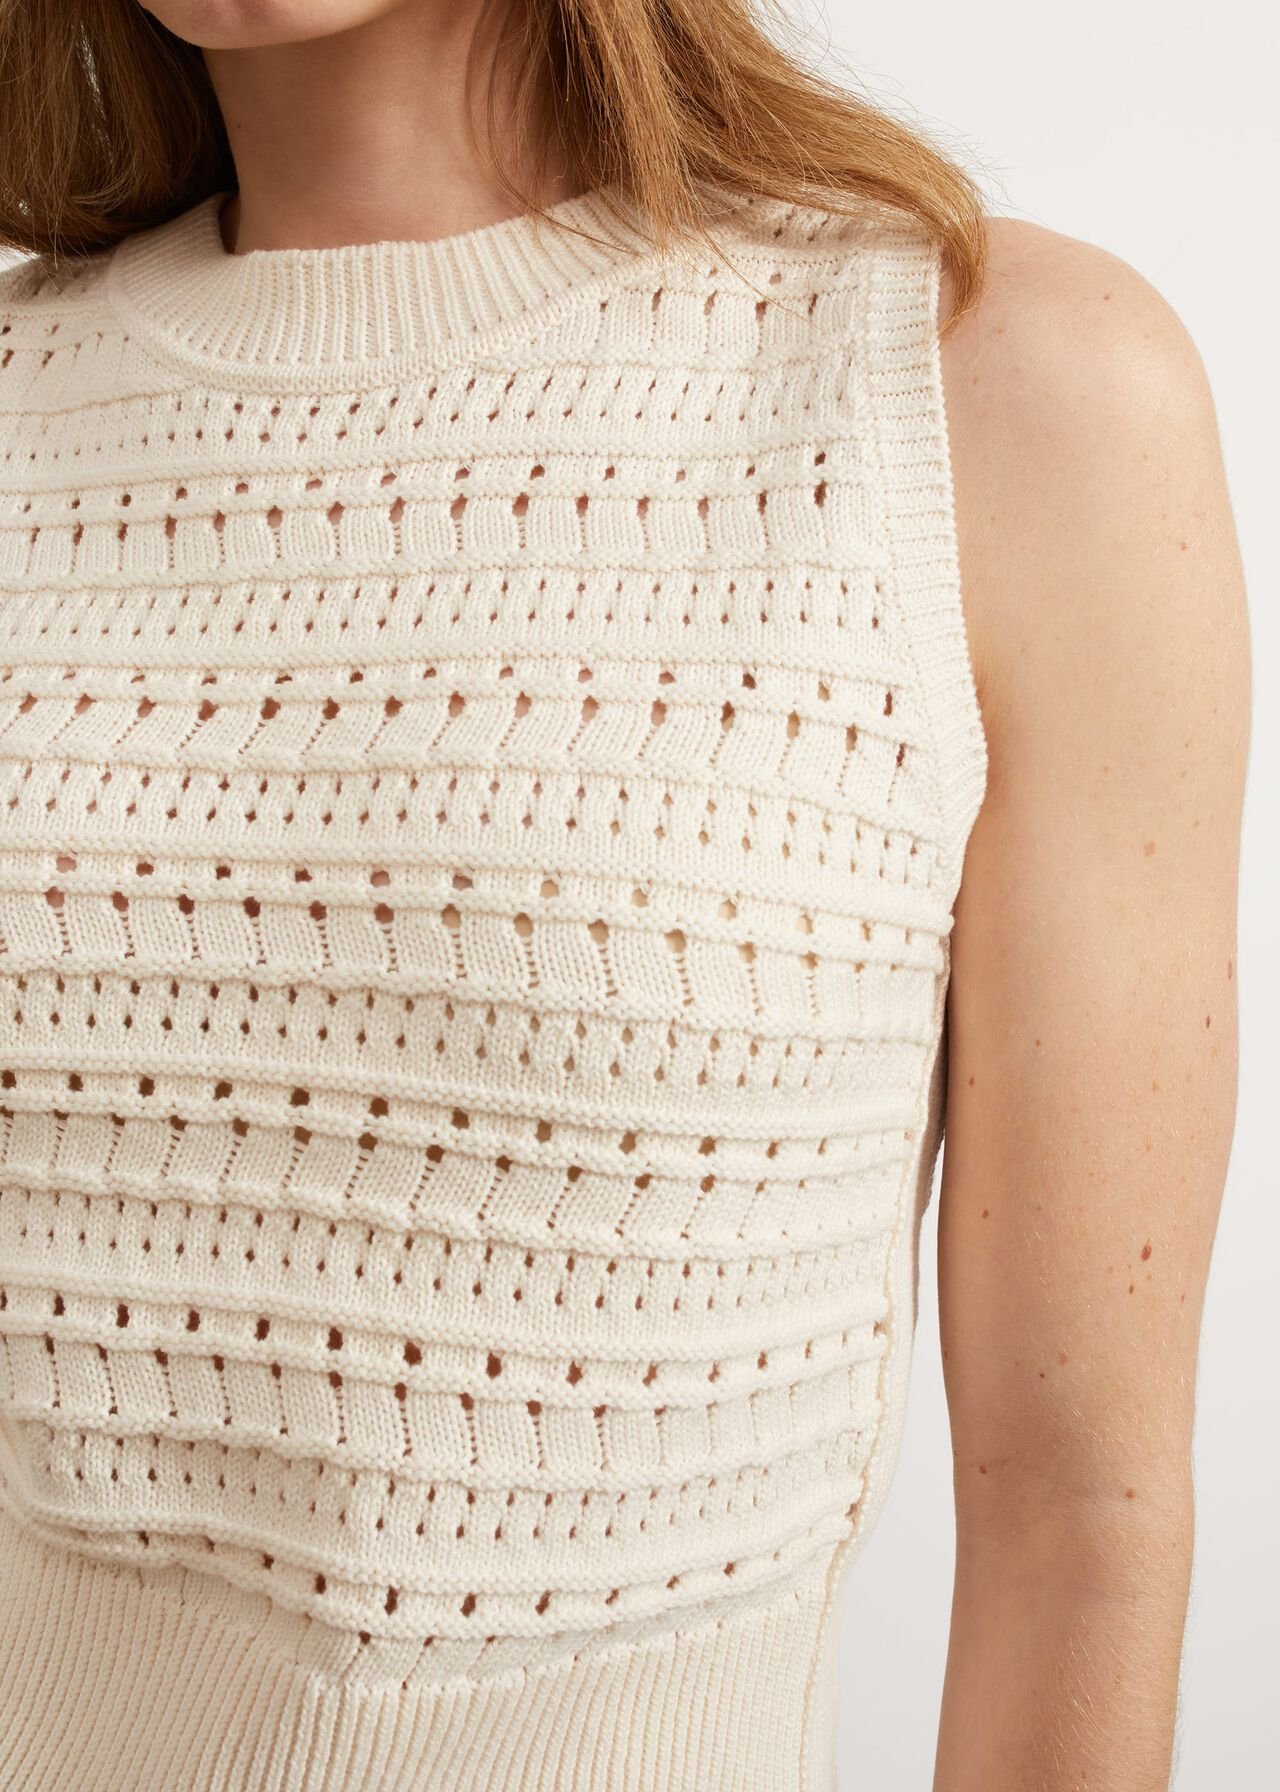 Colemere Knitted Tank Top, Buttercream, hi-res